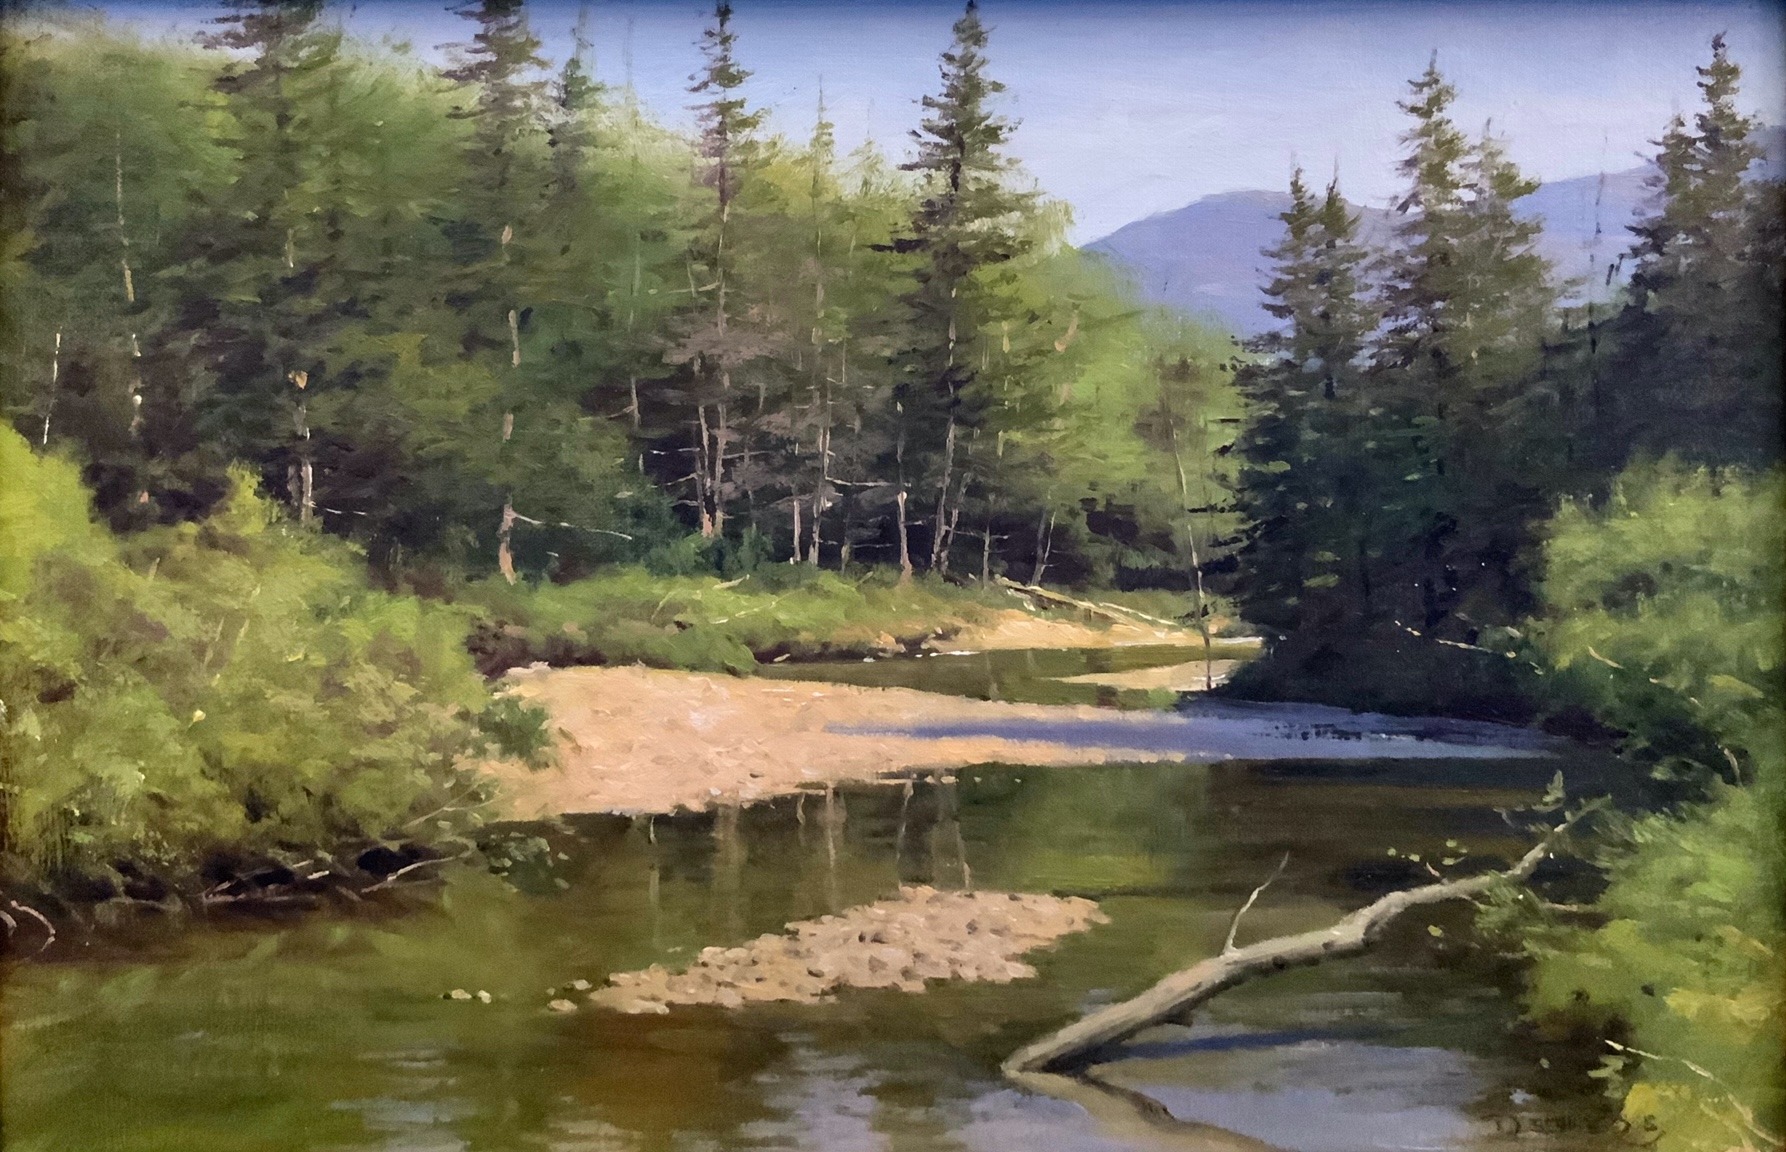 Painting from Don Demers of a landscape with a river receding into the distant mountains, surrounded by pine trees.